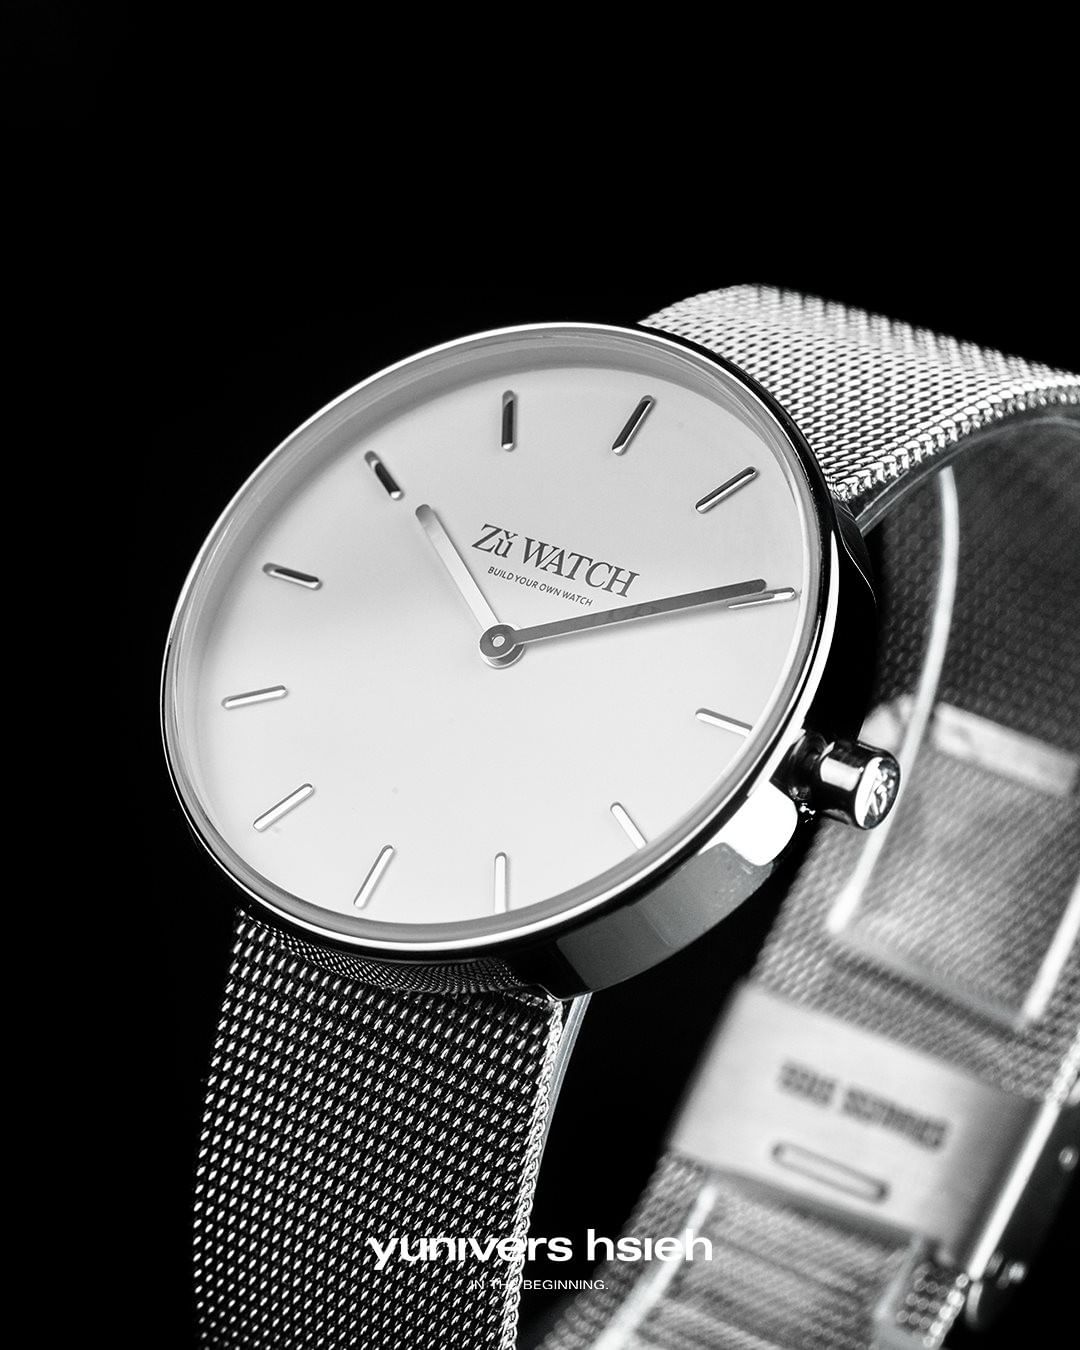 SIMPLE WHITE｜CLASSIC SILVER｜ZUWATCH SERIES - yunivers hsieh